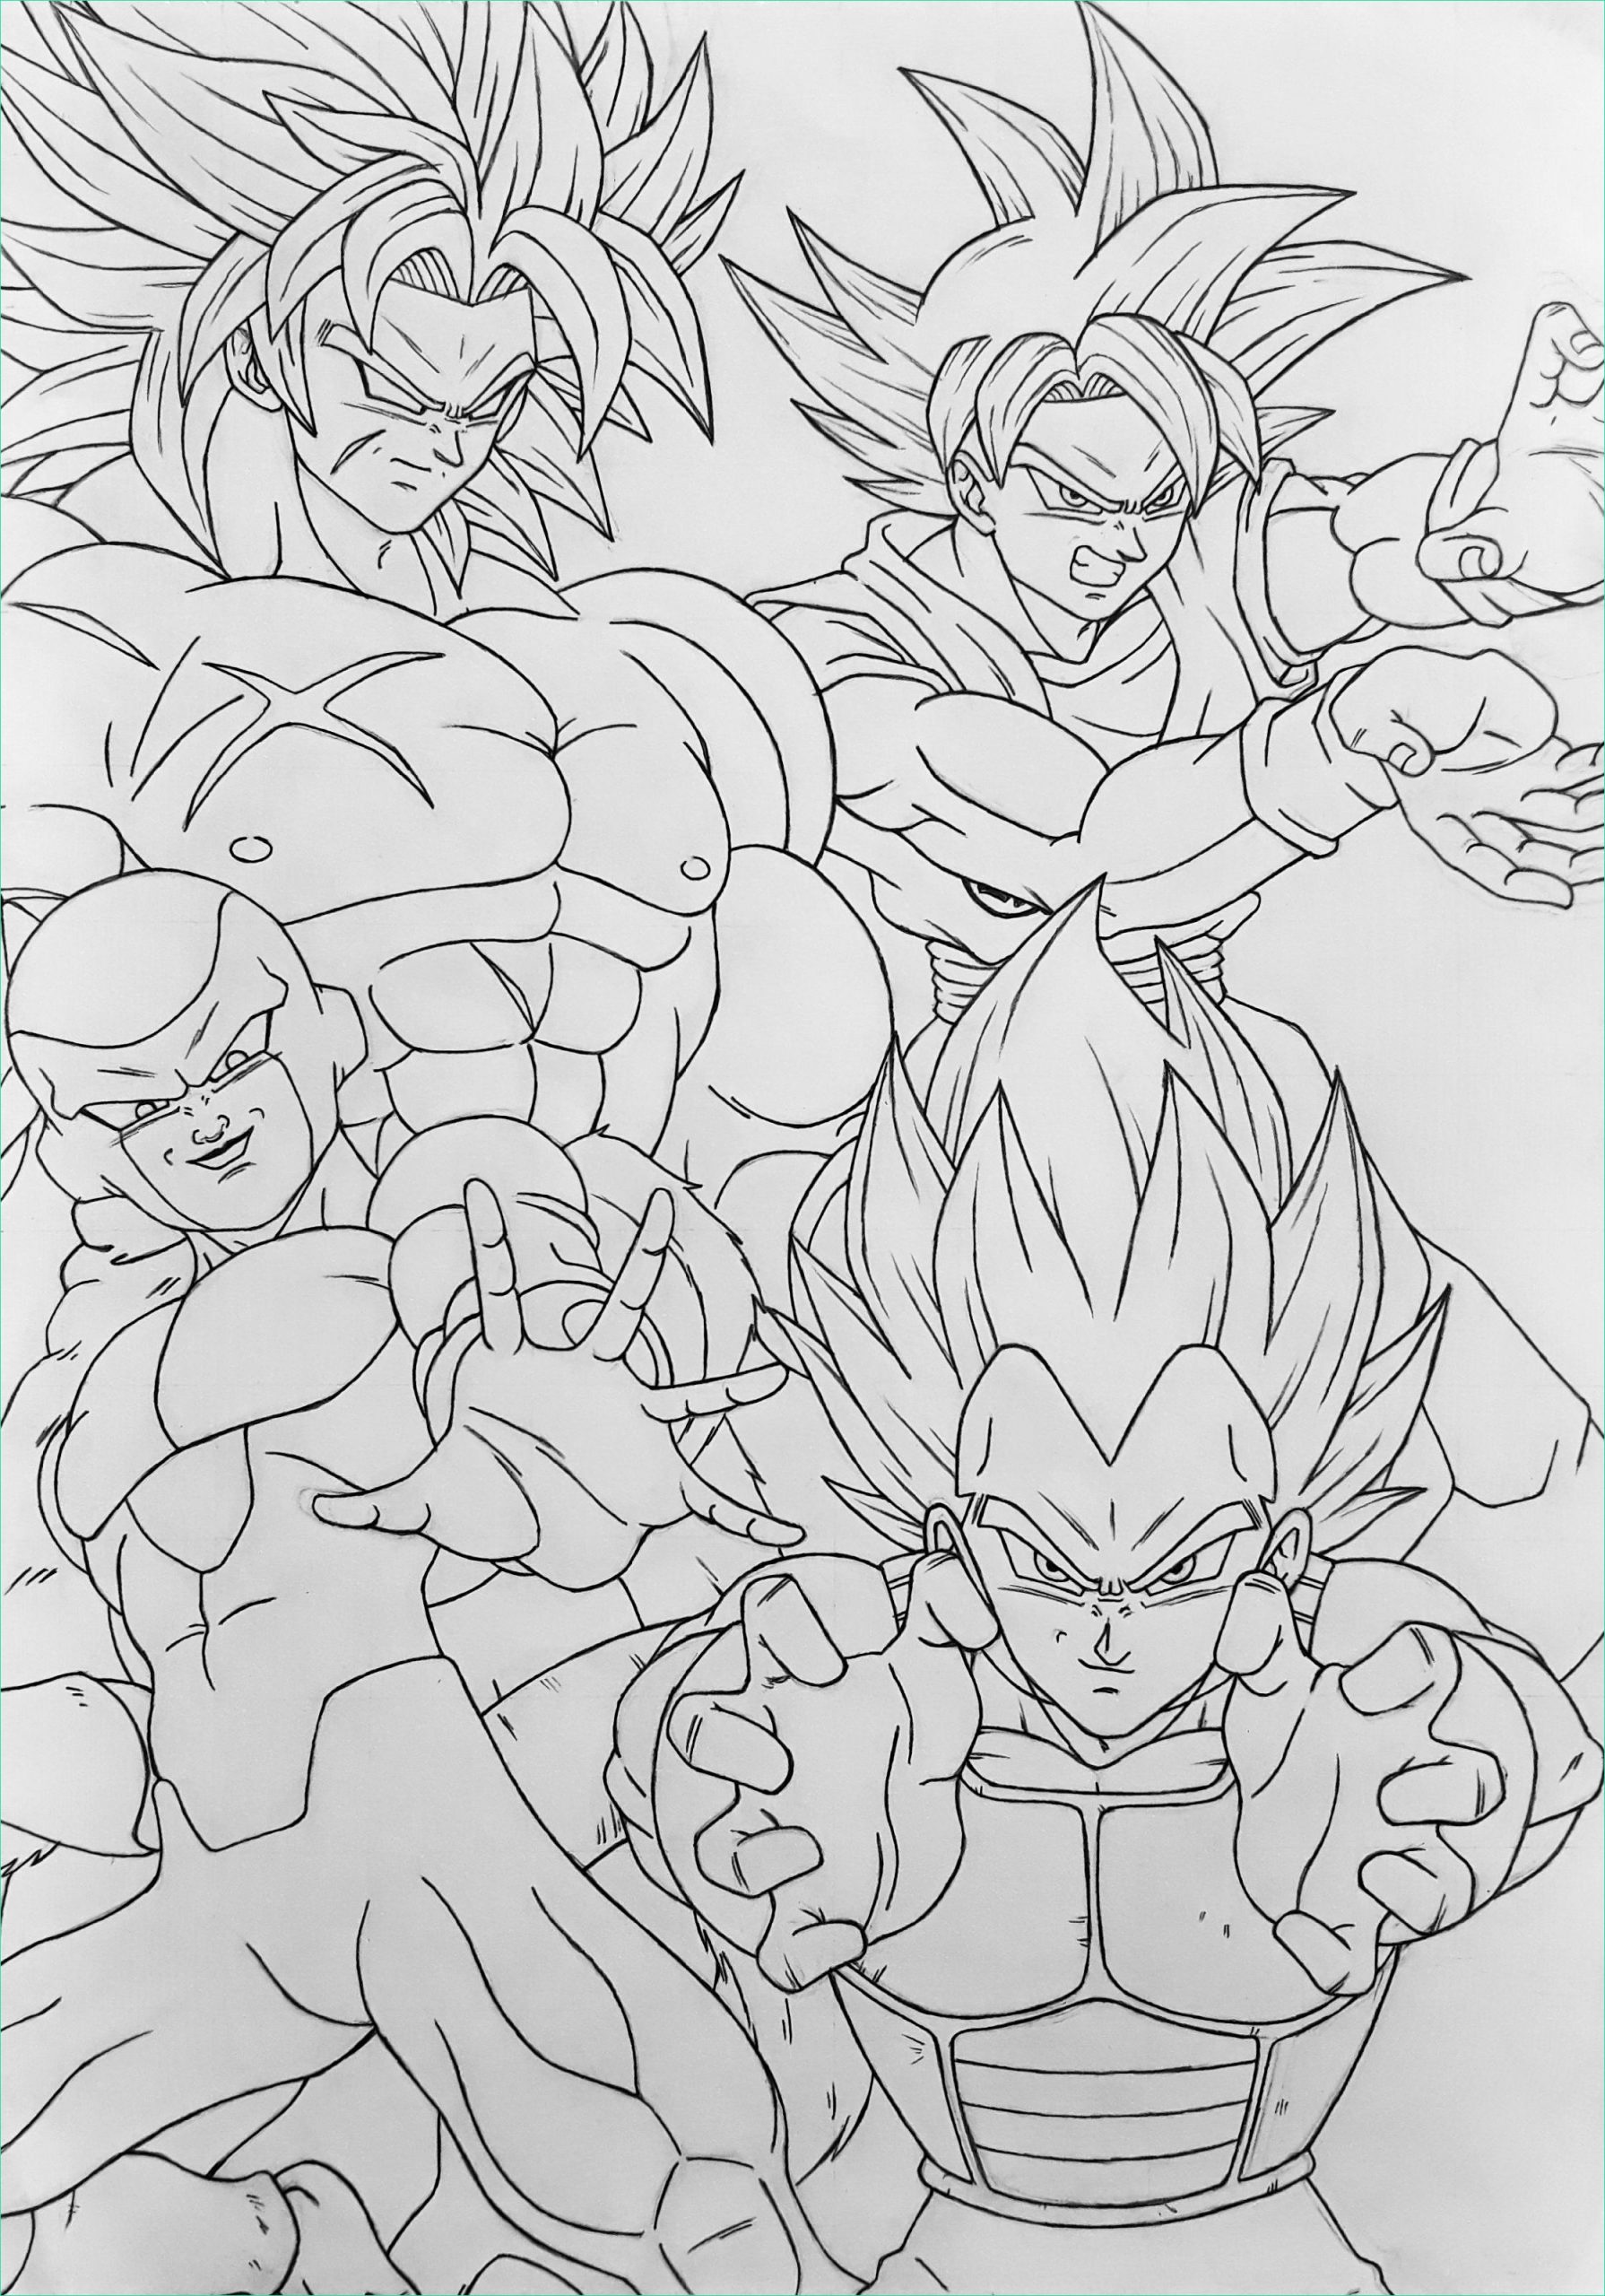 ssj4 broly coloring pages